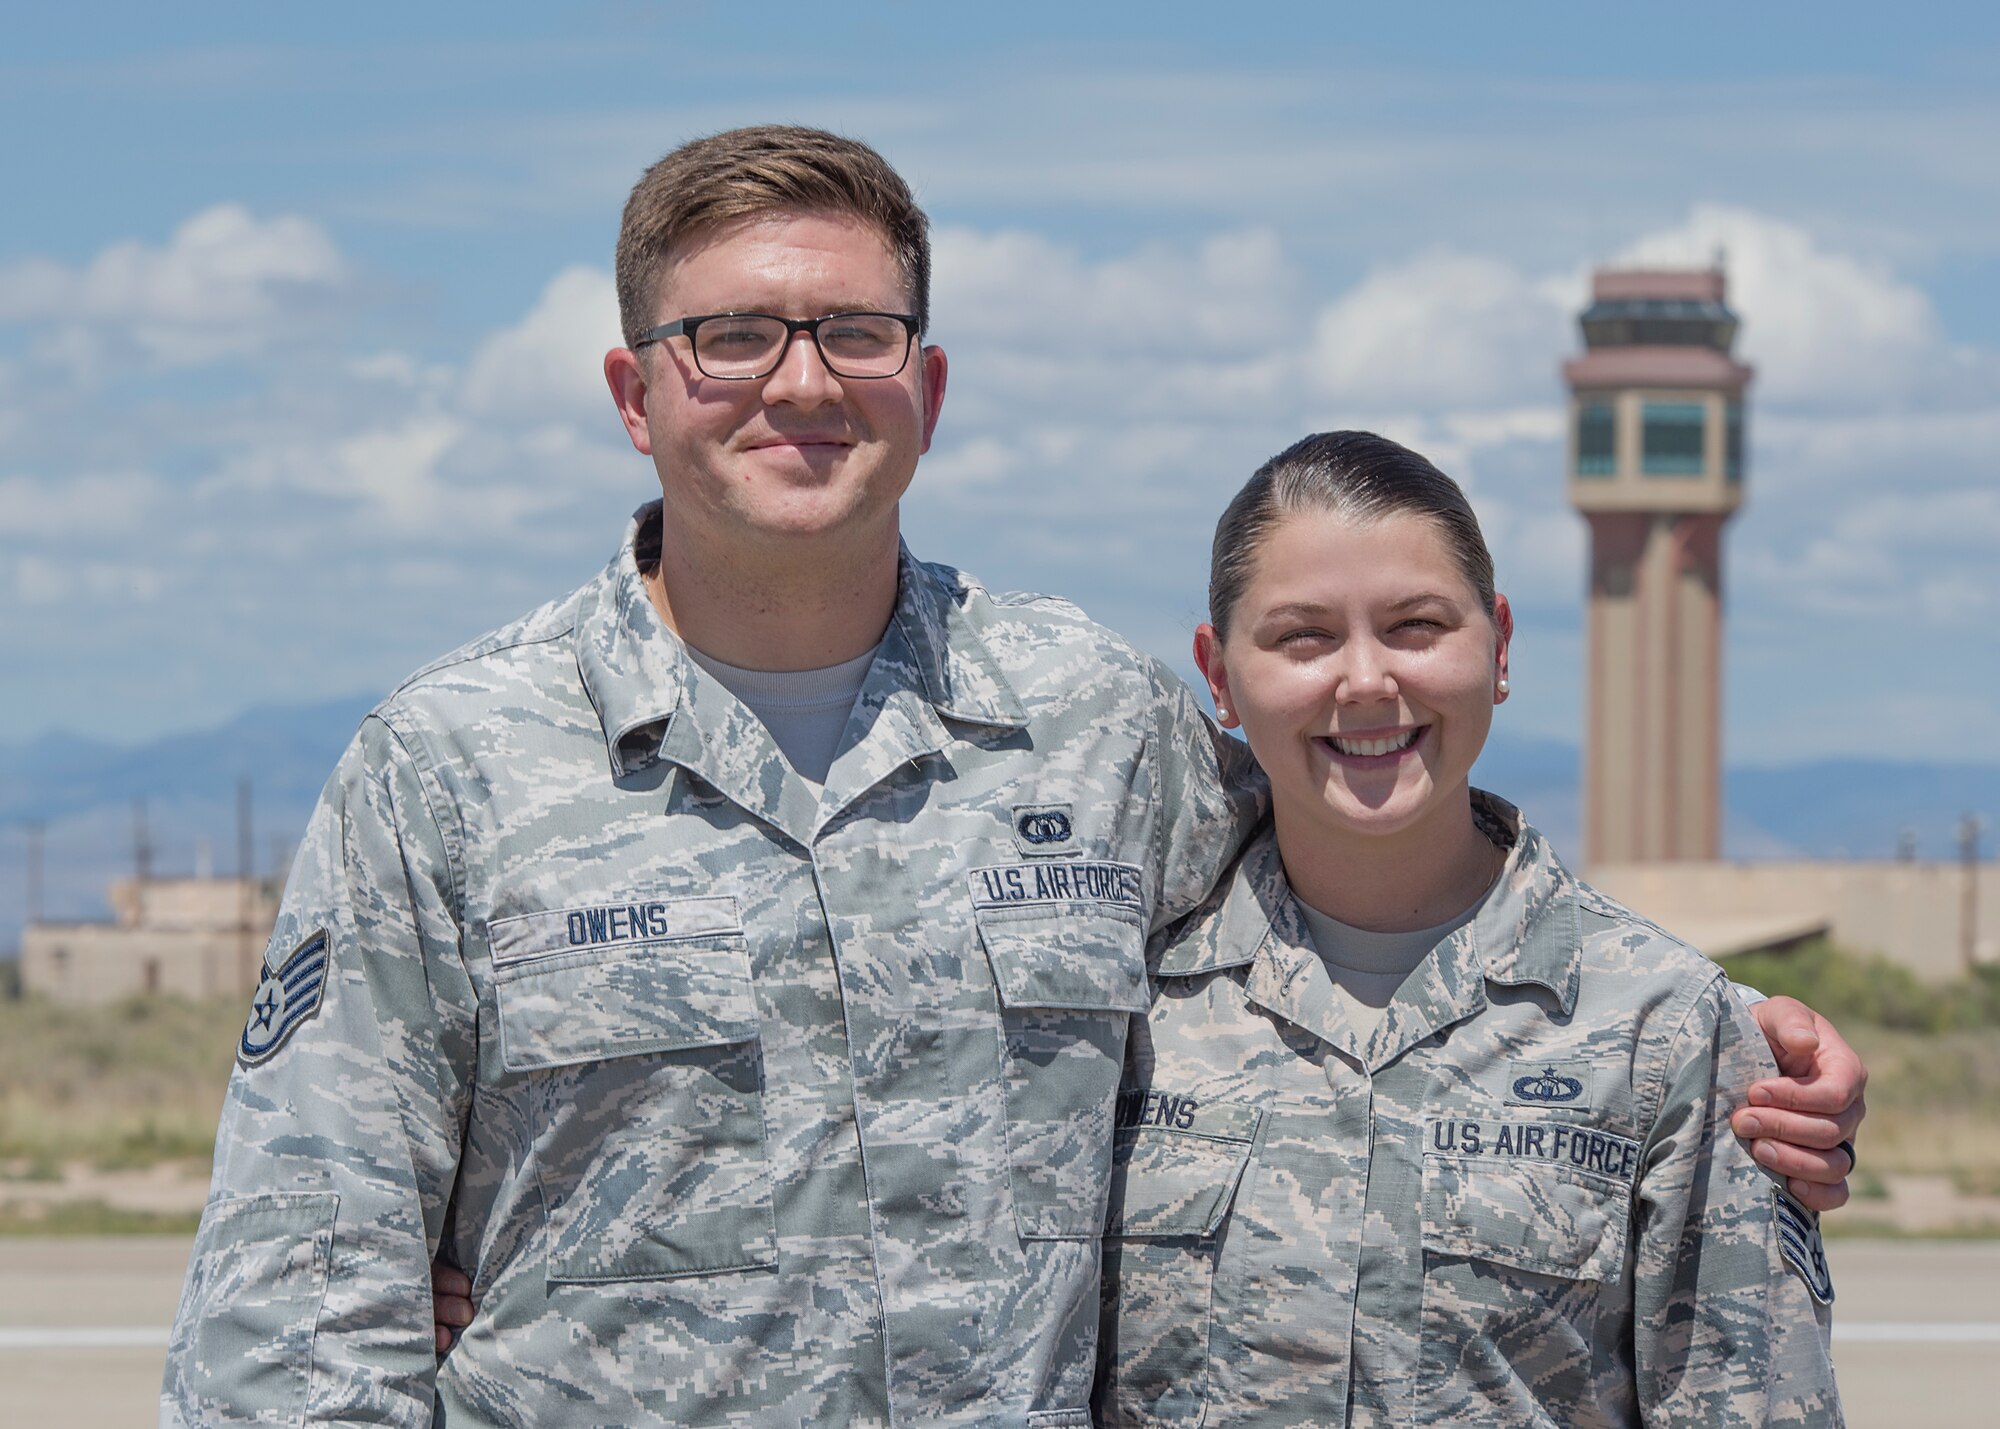 Staff Sgt. Colin Owens, 49th Wing Chapel religious affairs Airman, and Staff Sgt. Kristen Owens, 49th Operations Support Squadron air traffic controller, pose for a photo outside the air traffic control tower Aug. 23 on Holloman Air Force Base, N.M. While stationed at MacDill Air Force Base, Fla., Colin met and married his wife, Kristen, a fellow air traffic controller. (U.S. Air Force photo by Airman 1st Class Kindra Stewart)